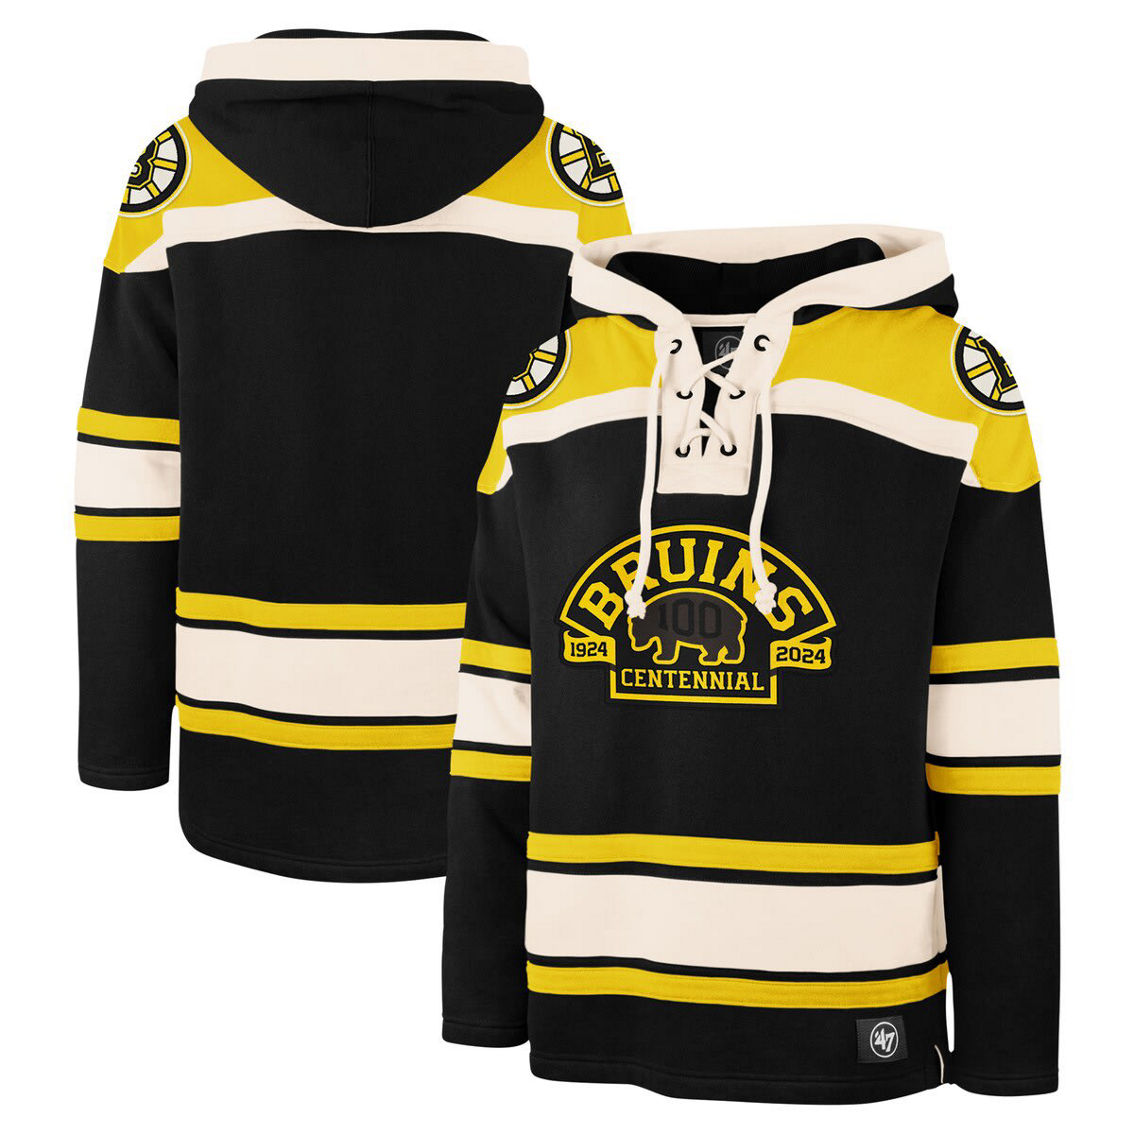 '47 Men's Black Boston Bruins 100th Anniversary Superior Lacer Pullover Hoodie - Image 2 of 4